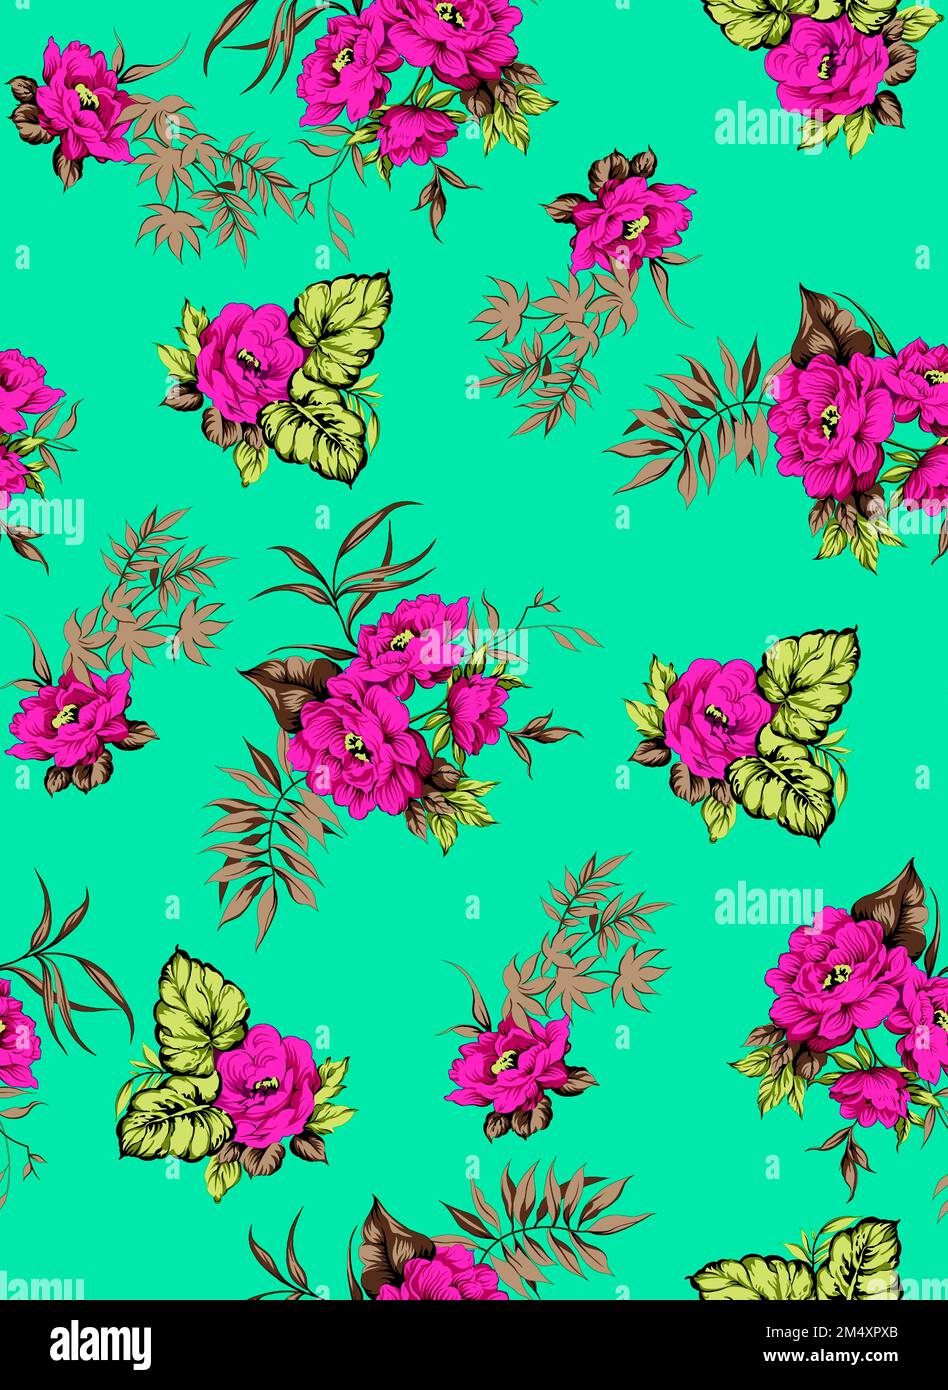 Pink flowers with green leaves on cyan or background floral Pattern For Textile Use. Seamless Floral Pattern For Kurti, skirts and dresses. Stock Photo